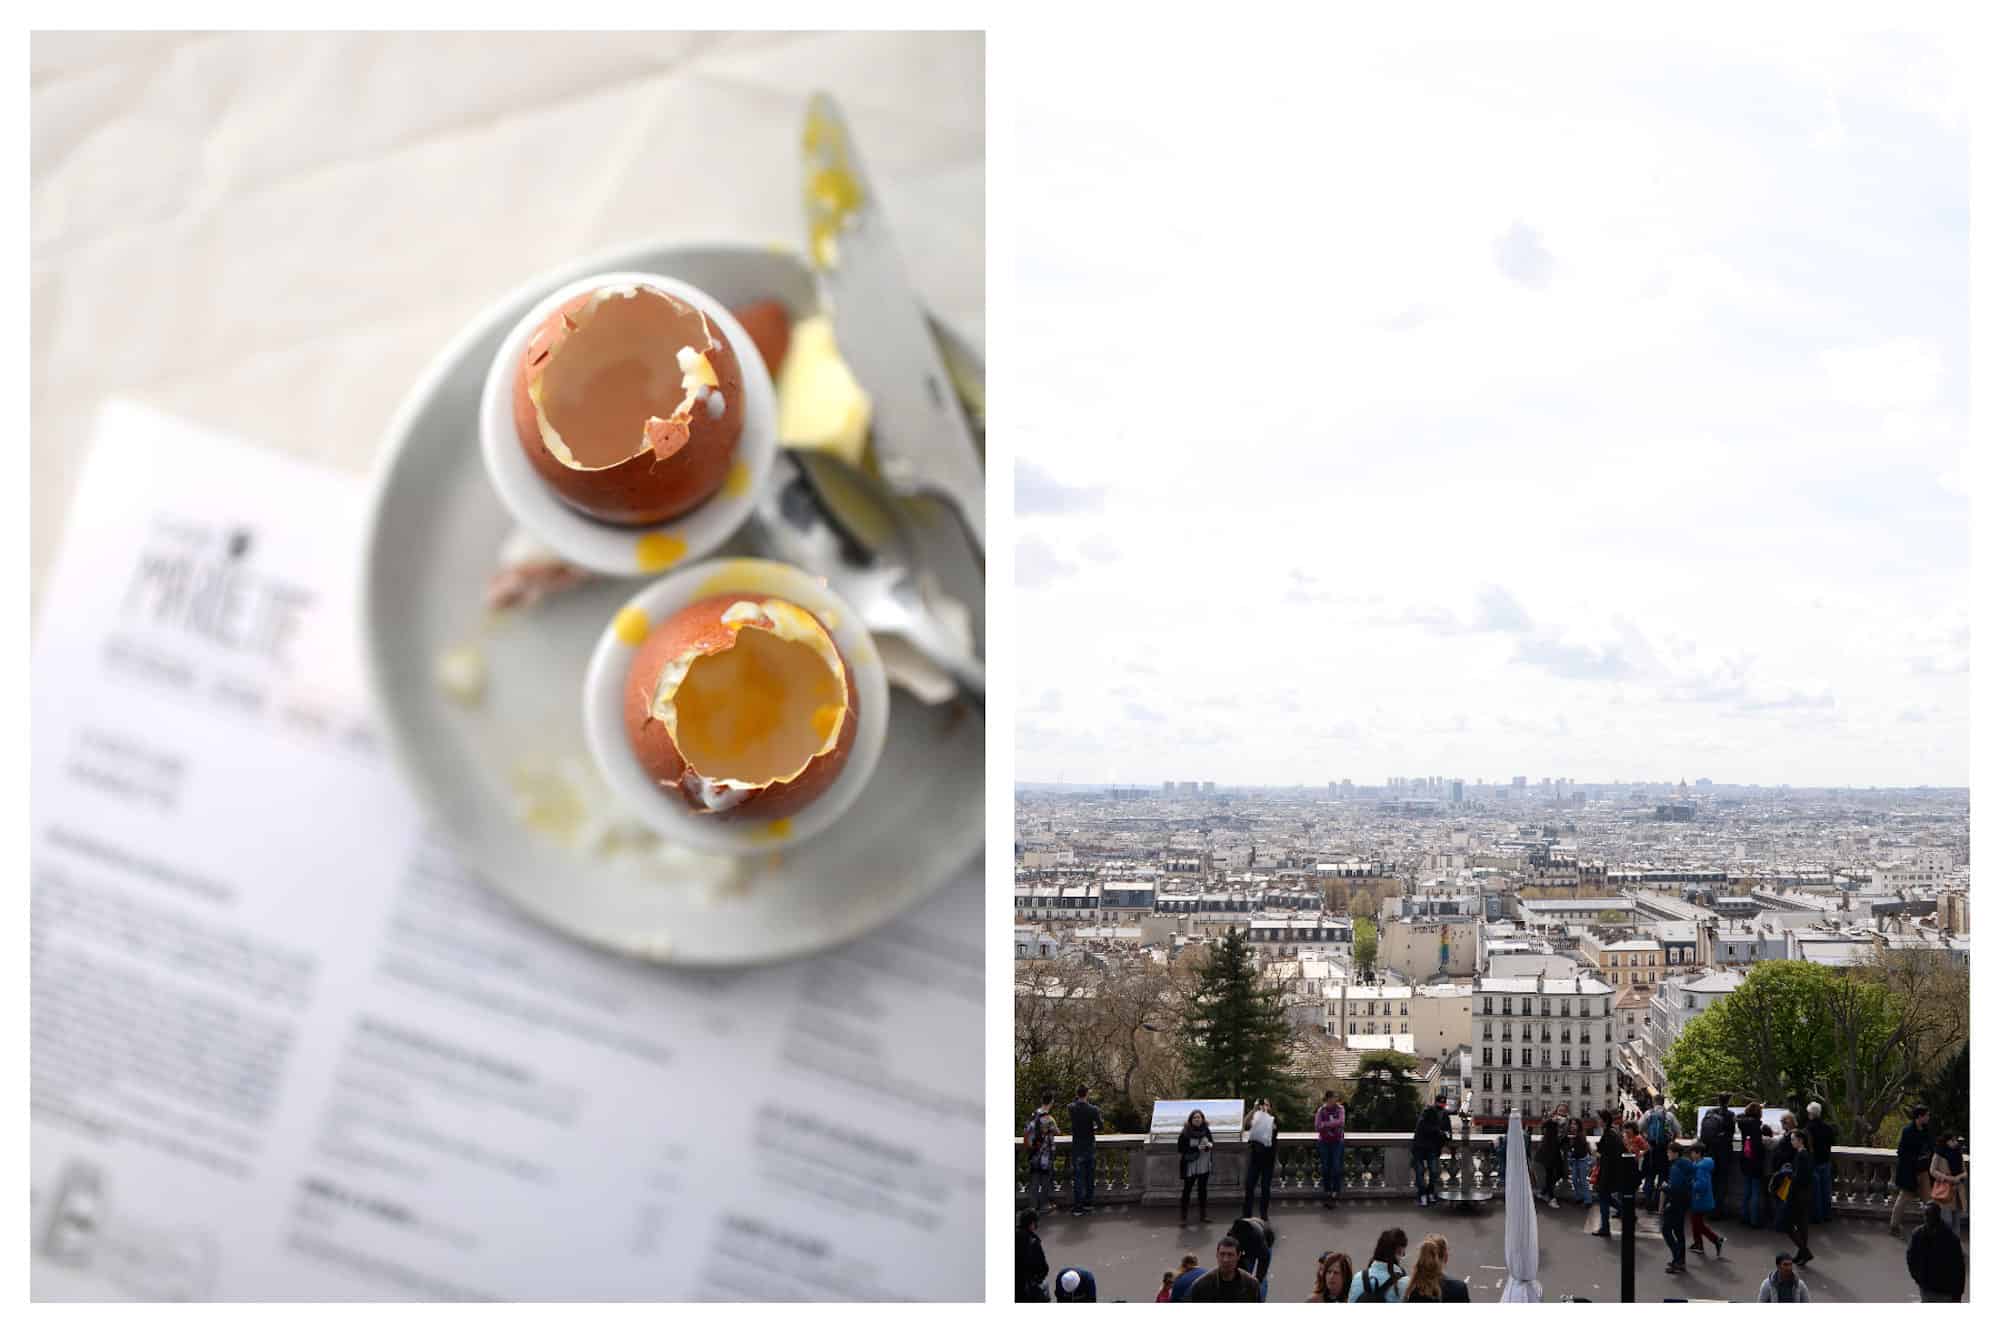 Breakfast of runny eggs that have been eaten, set on a plate on a menu at a Parisian bistro (left). The panoramic view of the Paris rooftops from the top of Montmartre (right).